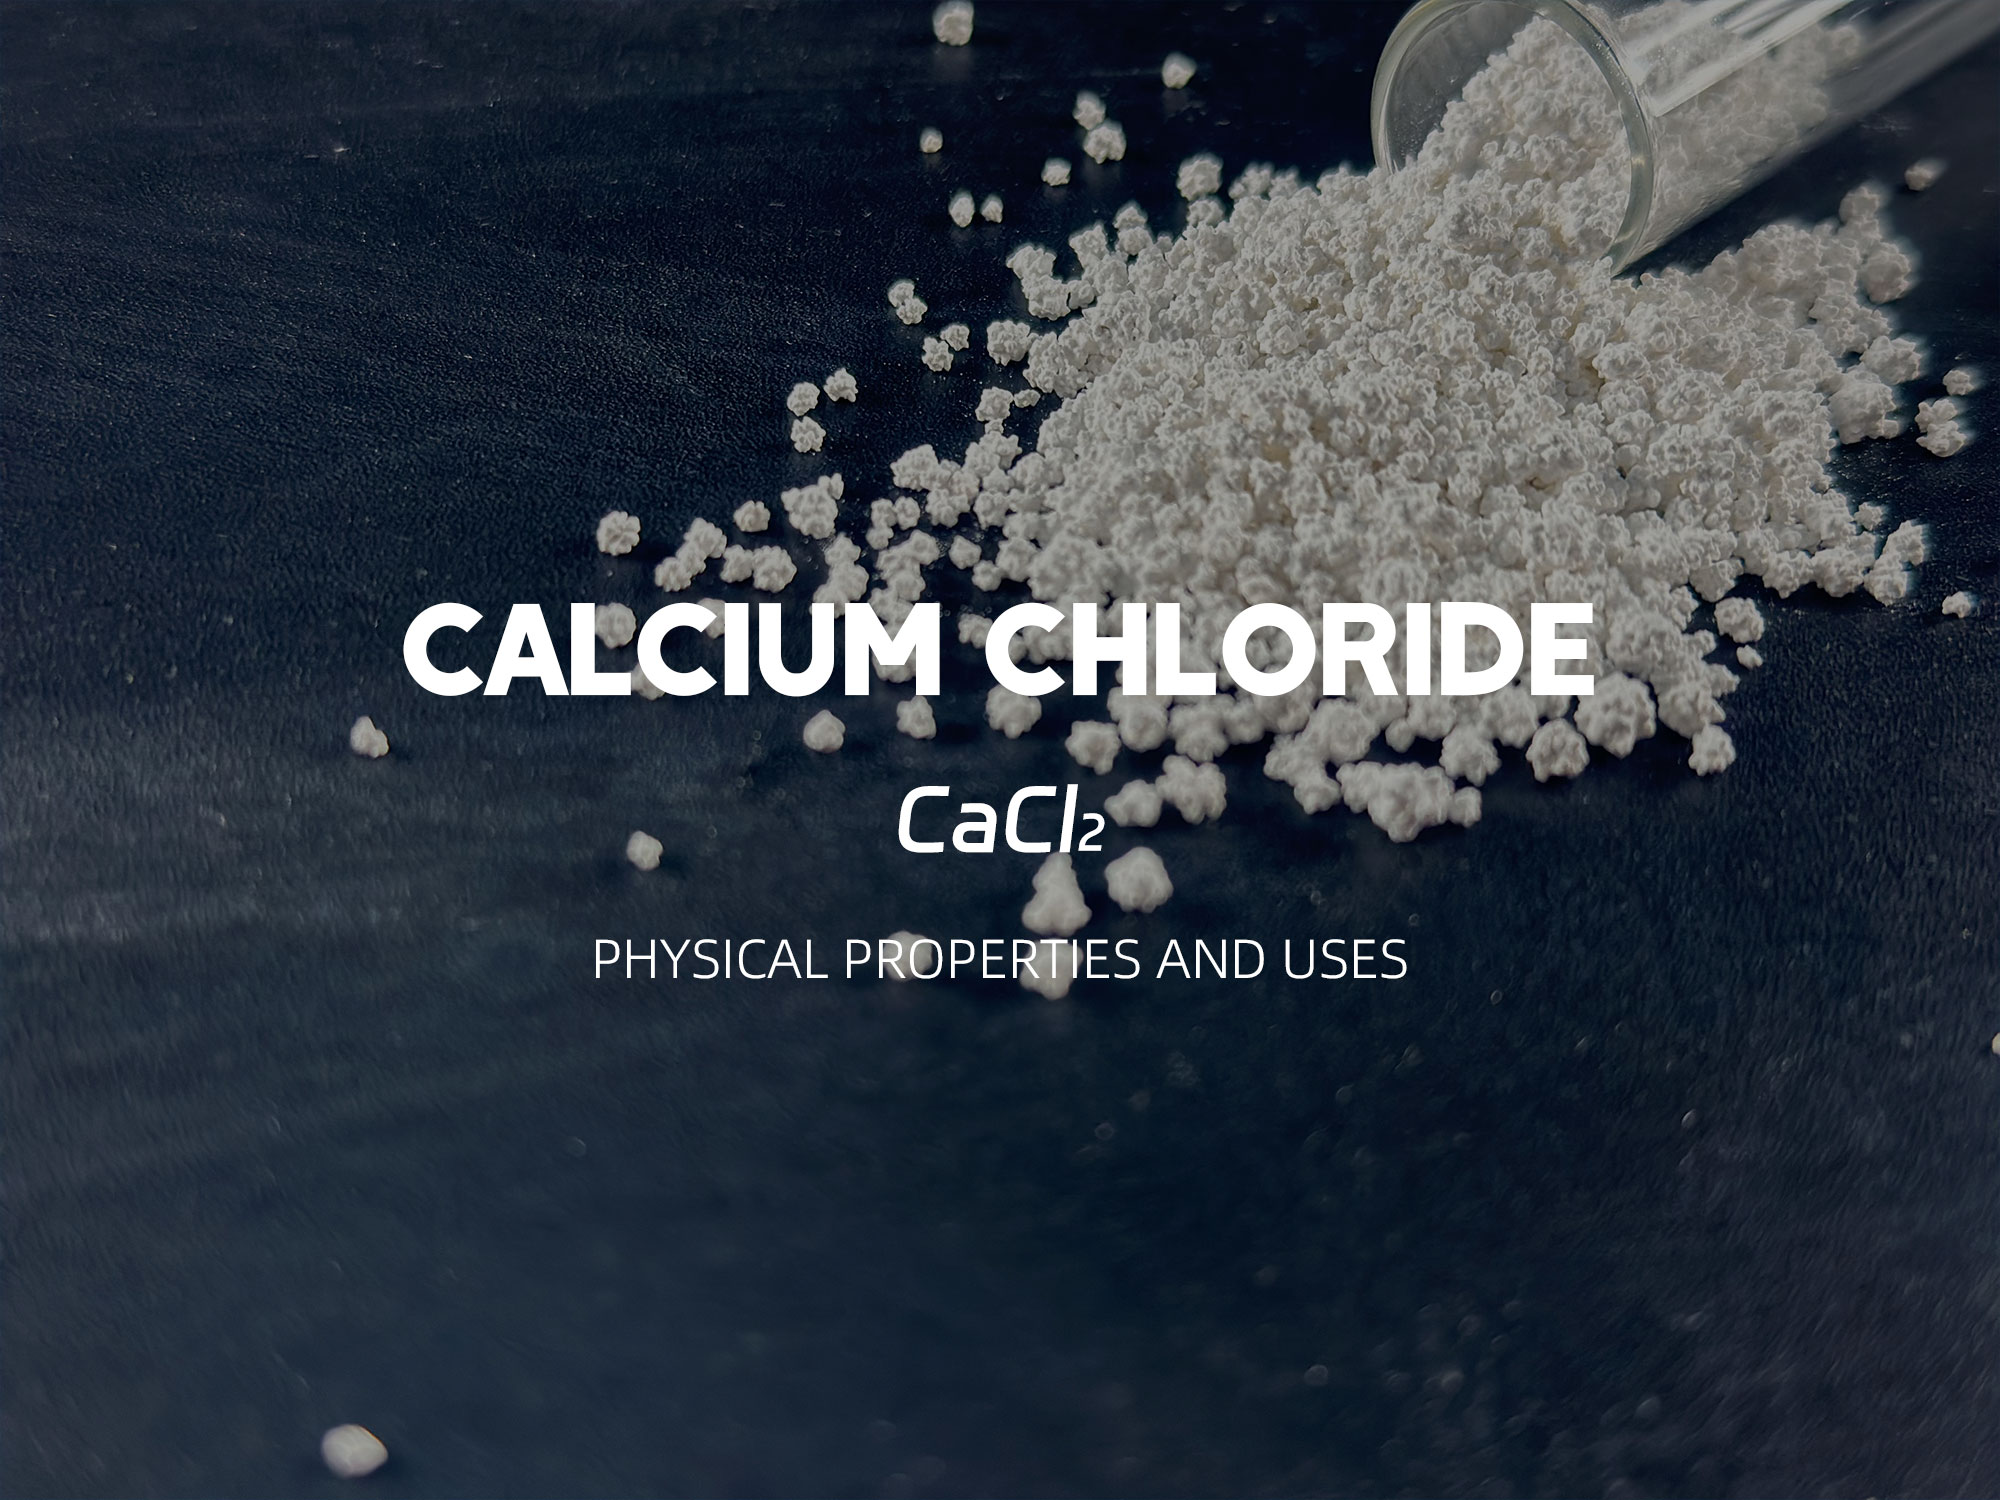 Physical properties and uses of calcium chloride